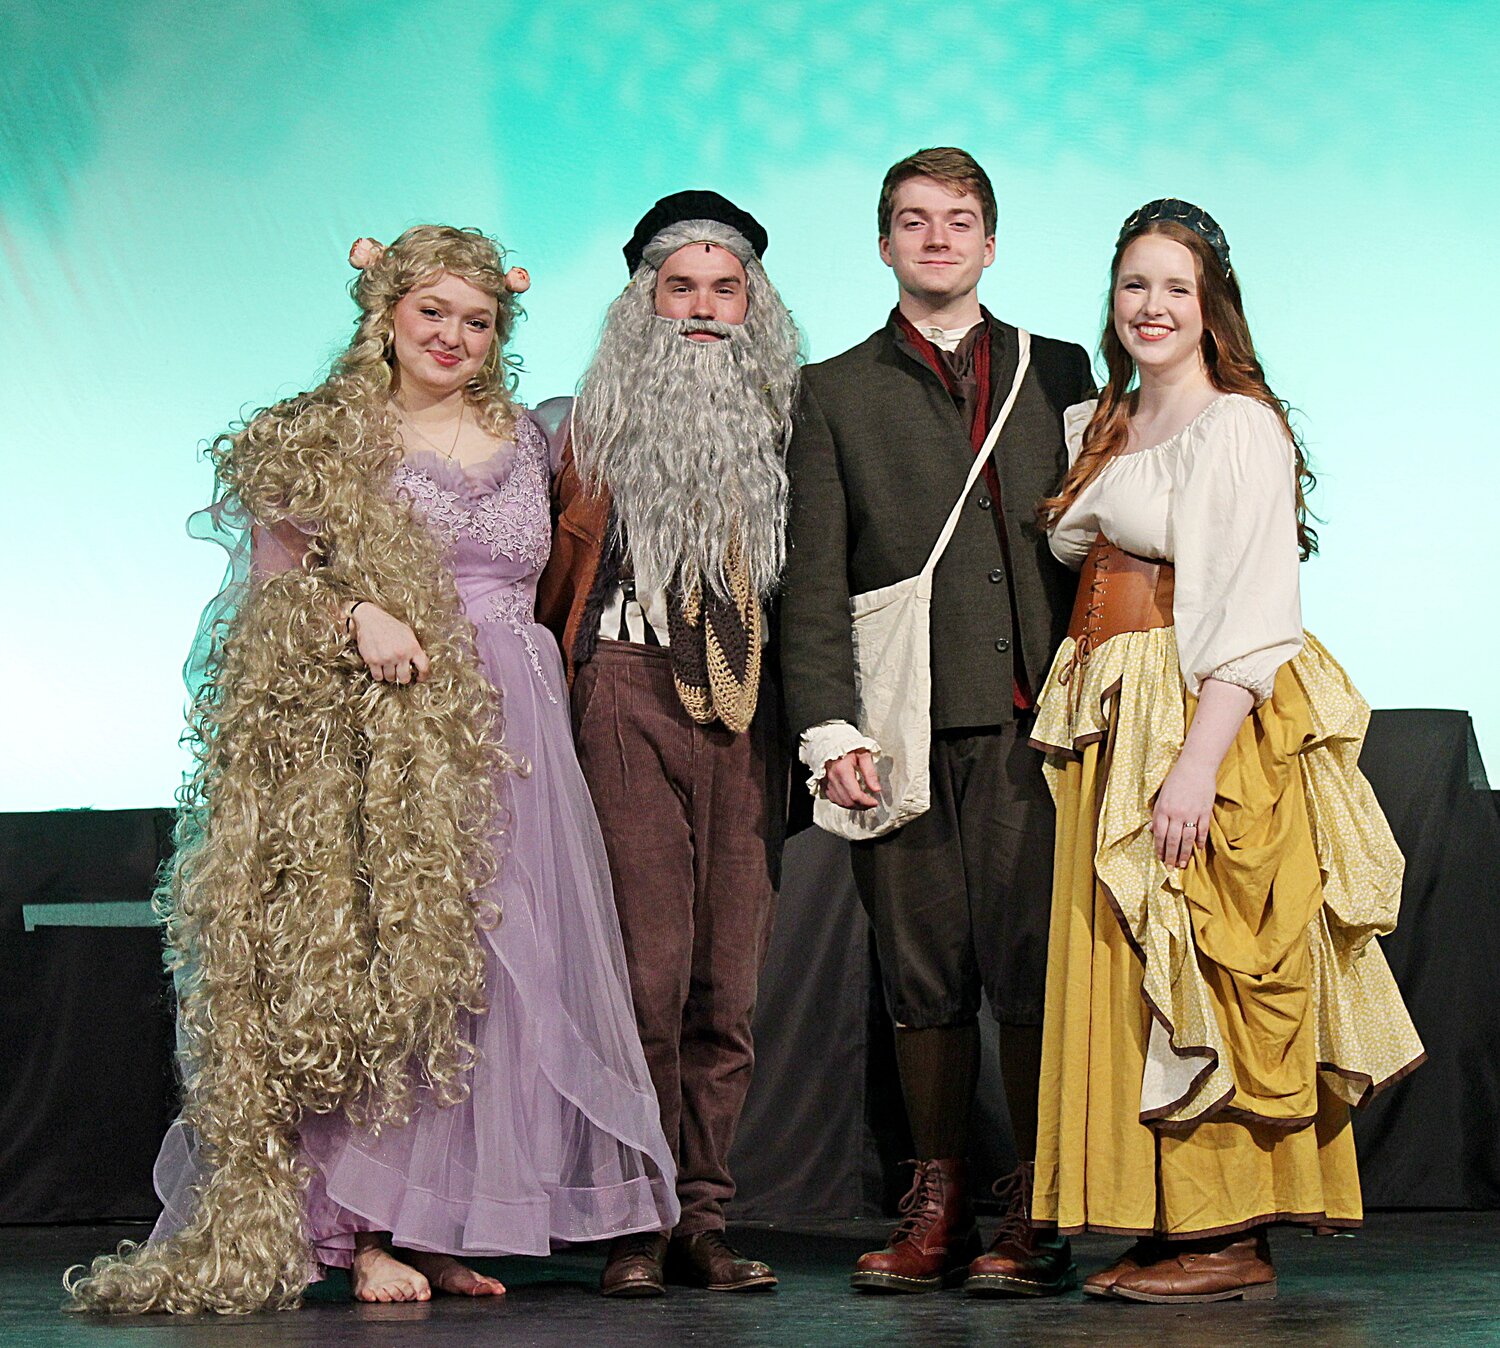 In the show, Mahri McLean is Rapunzel, Benton Donahue as the Mysterious Man, Thomas Earl as The Baker and Genevieve Moore as The Baker’s Wife.